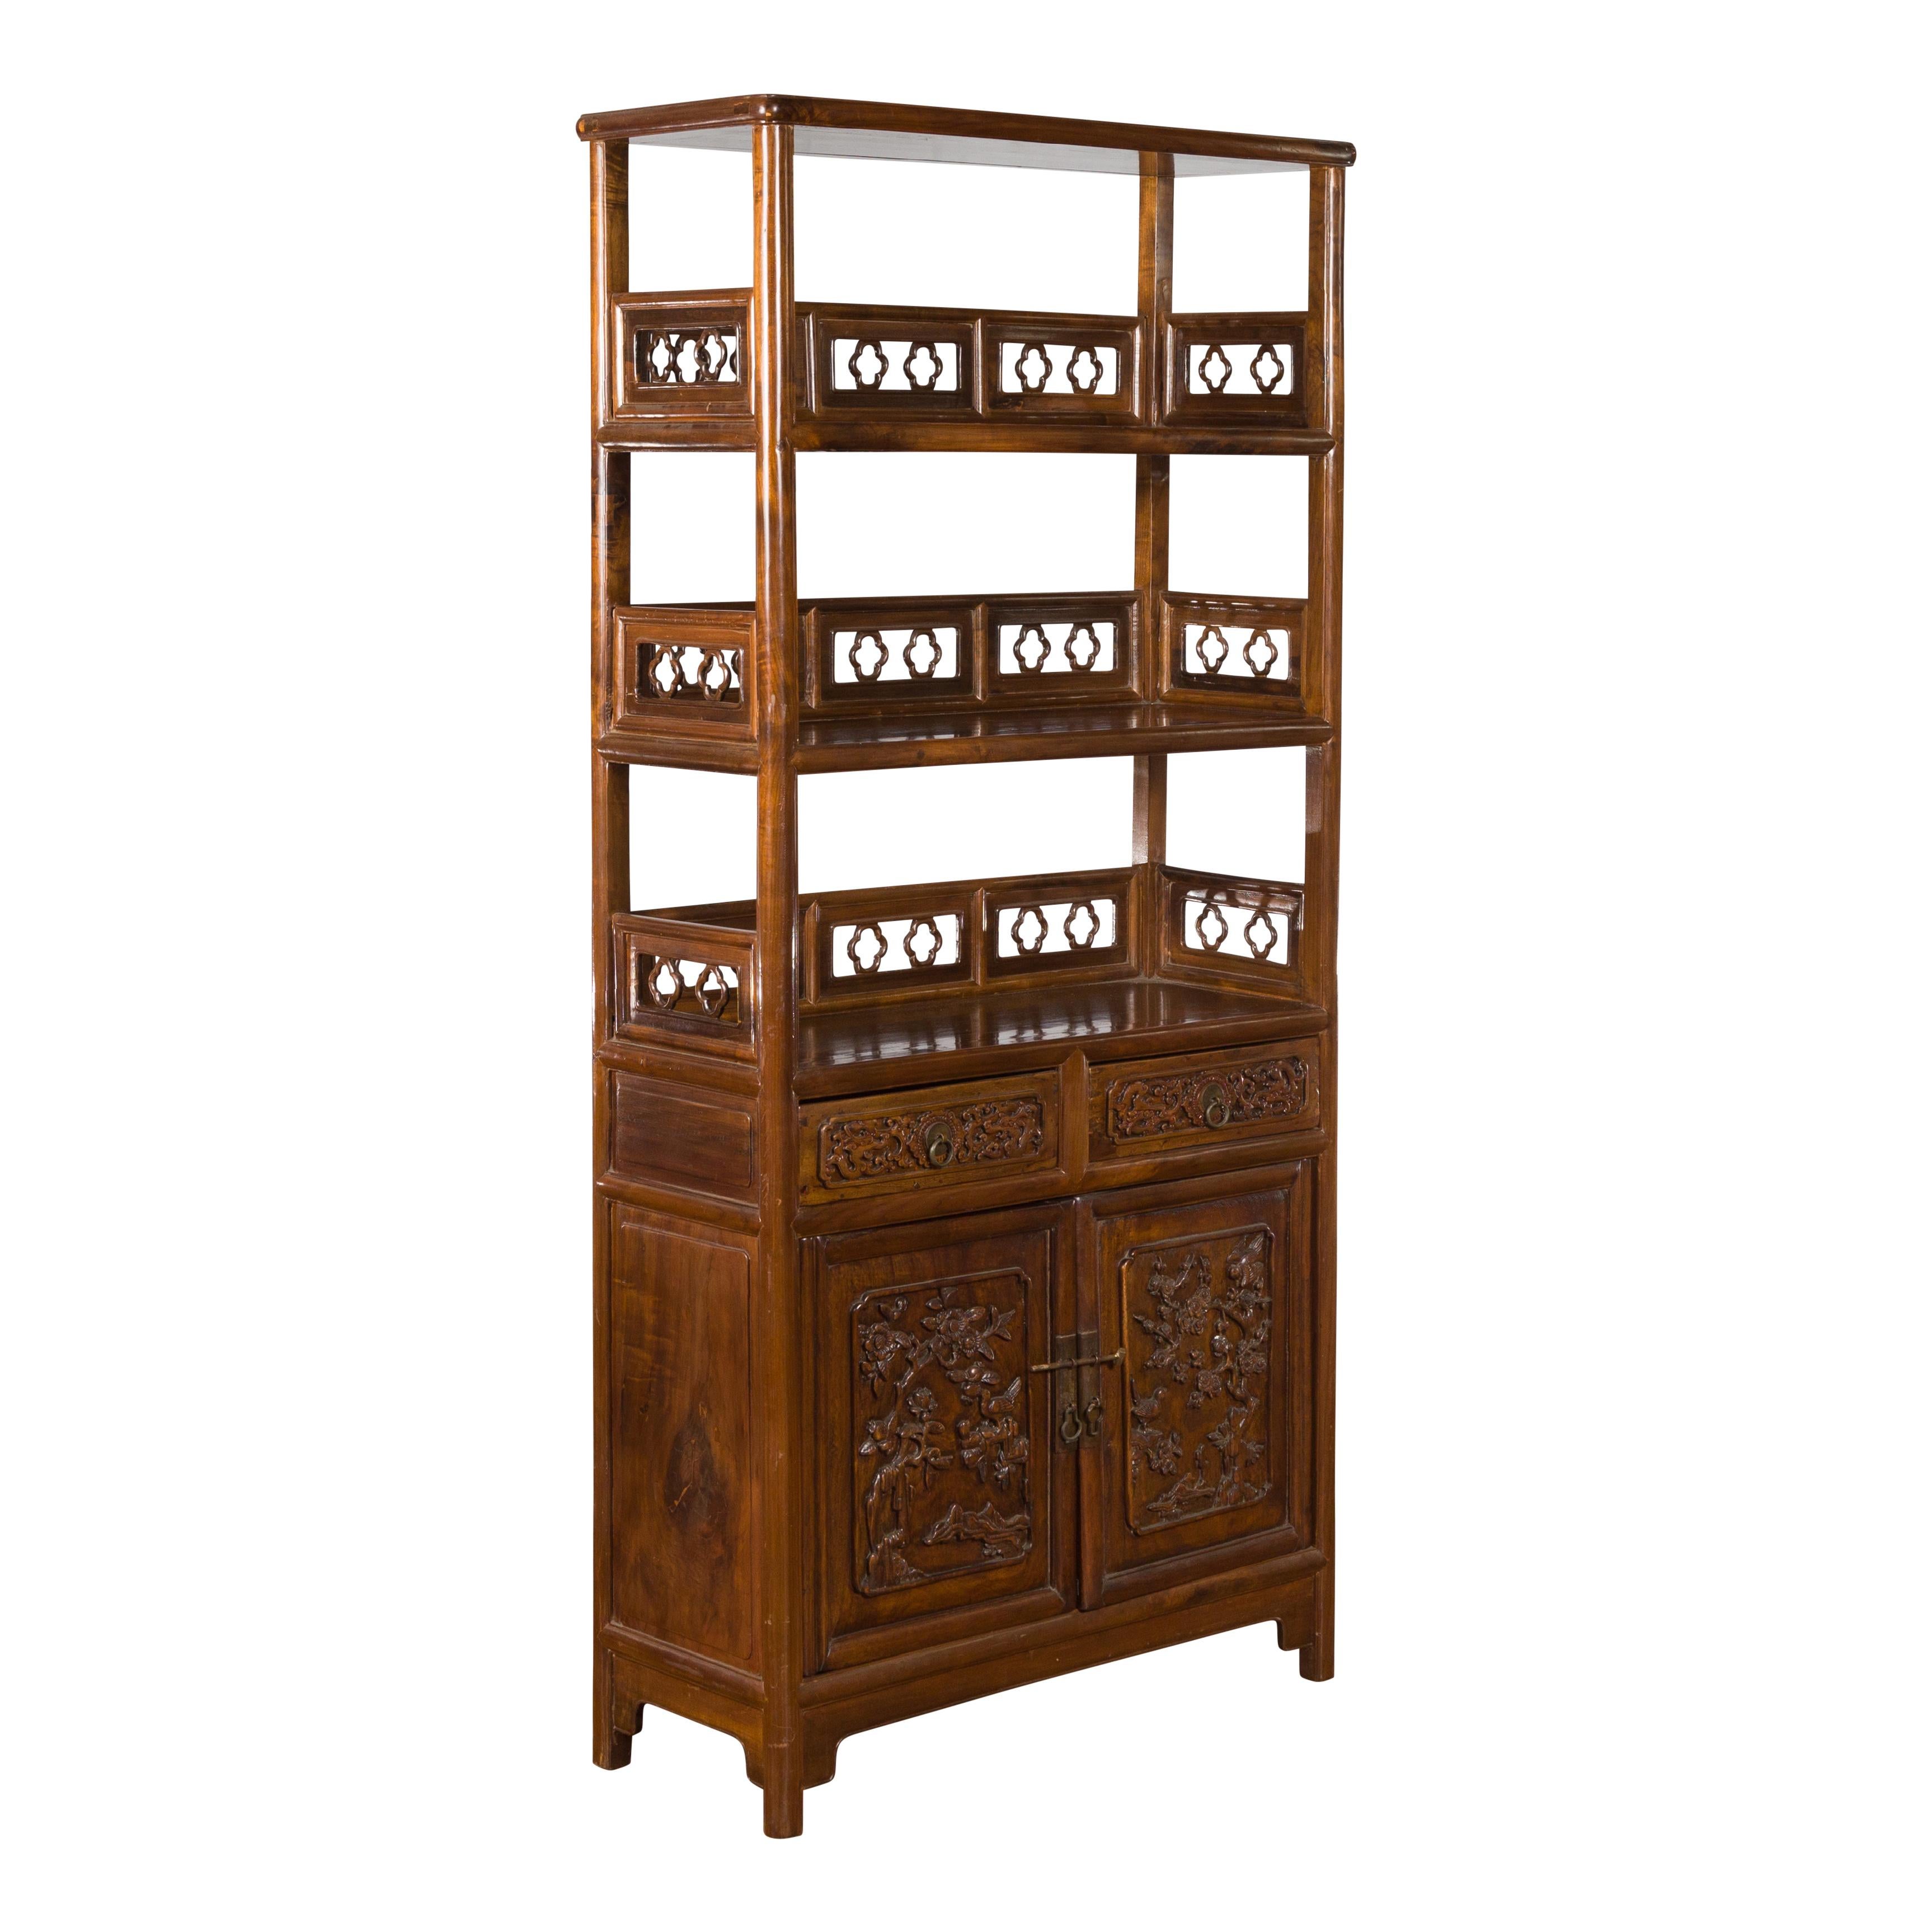 A Chinese bookcase from the early 20th century, with carved open shelves, two drawers and lower cabinet. Created in China during the early years of the 20th century, this bookcase features carved open shelves adorned on three sides with pierced